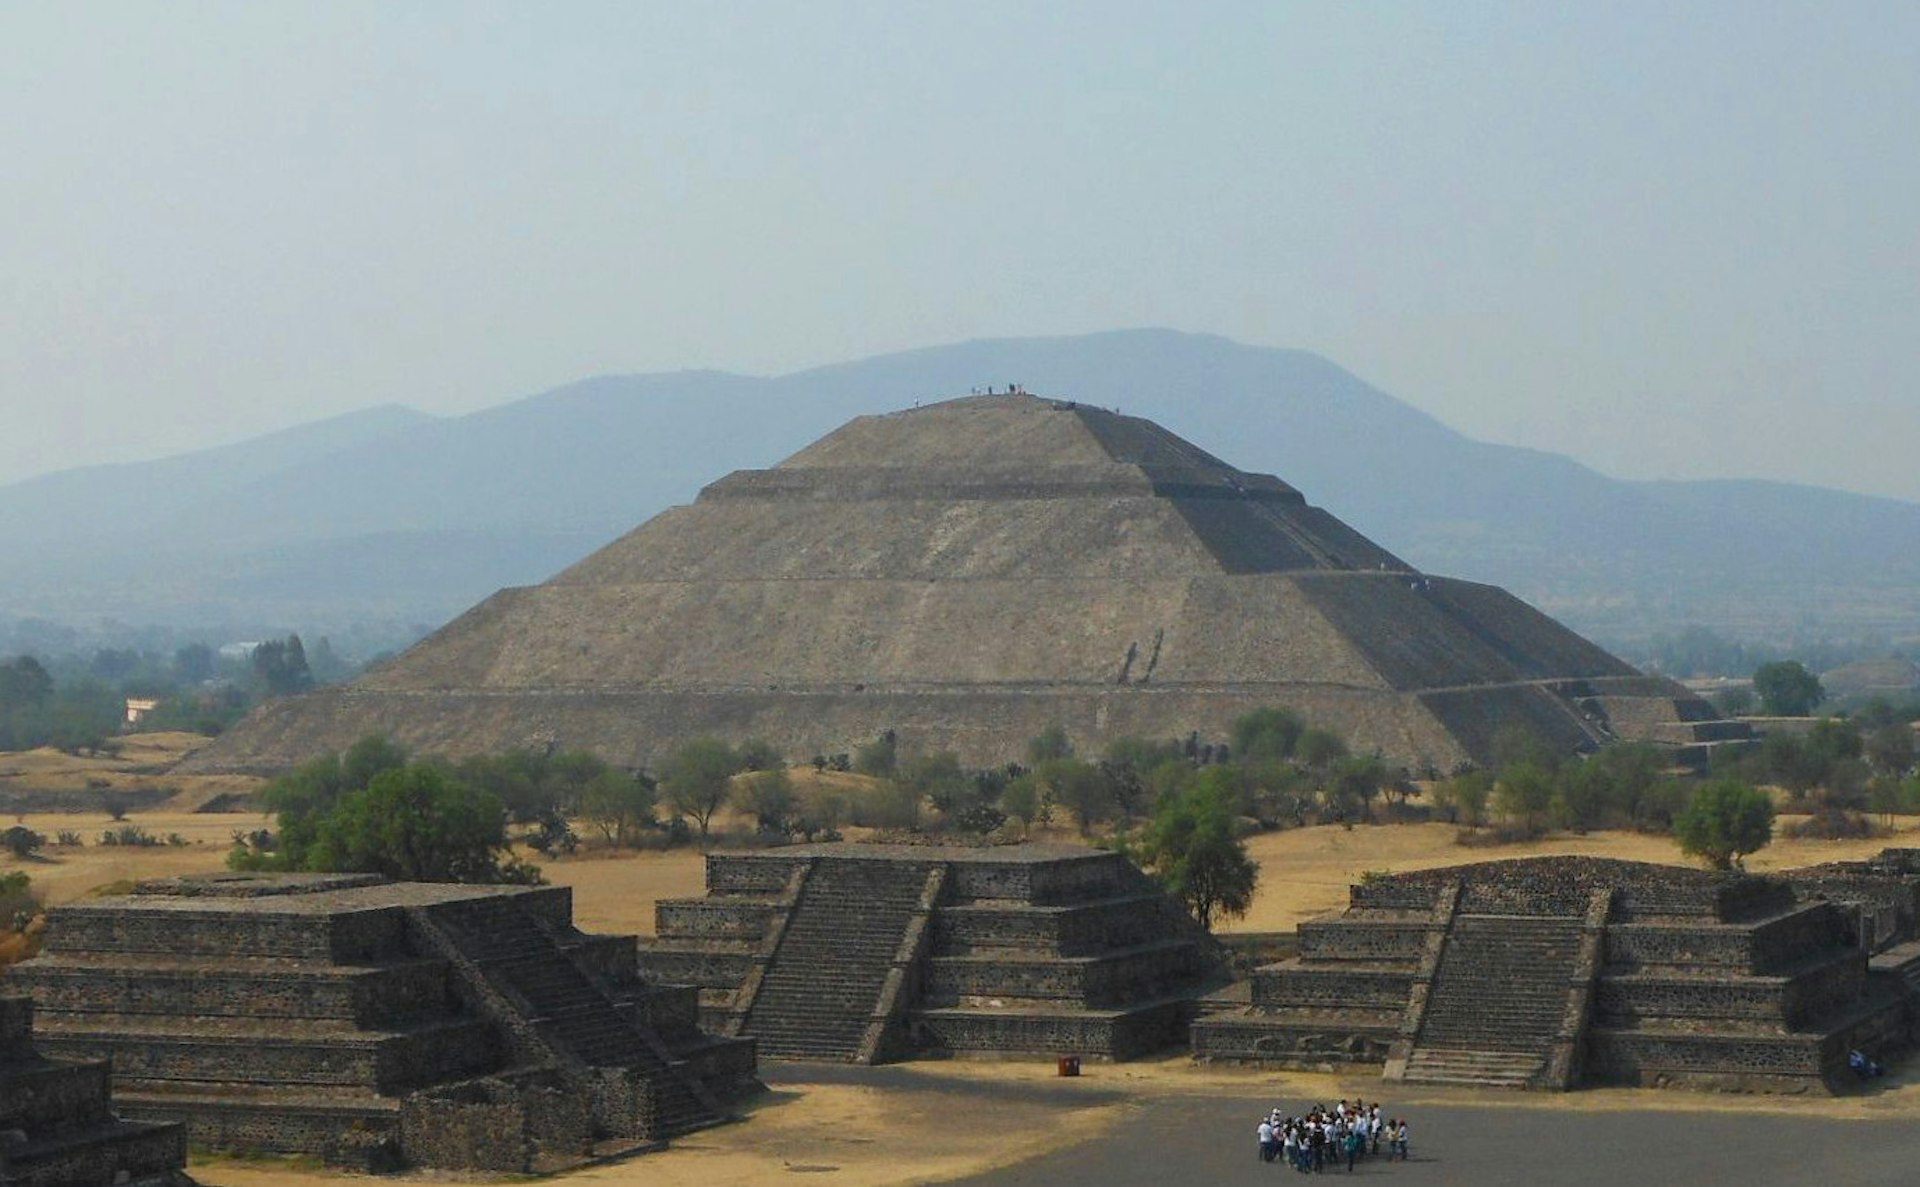 The pyramids at Teotihuacan are jaw-droppingly spectacular. Image by Katja Gaskell / Lonely Planet